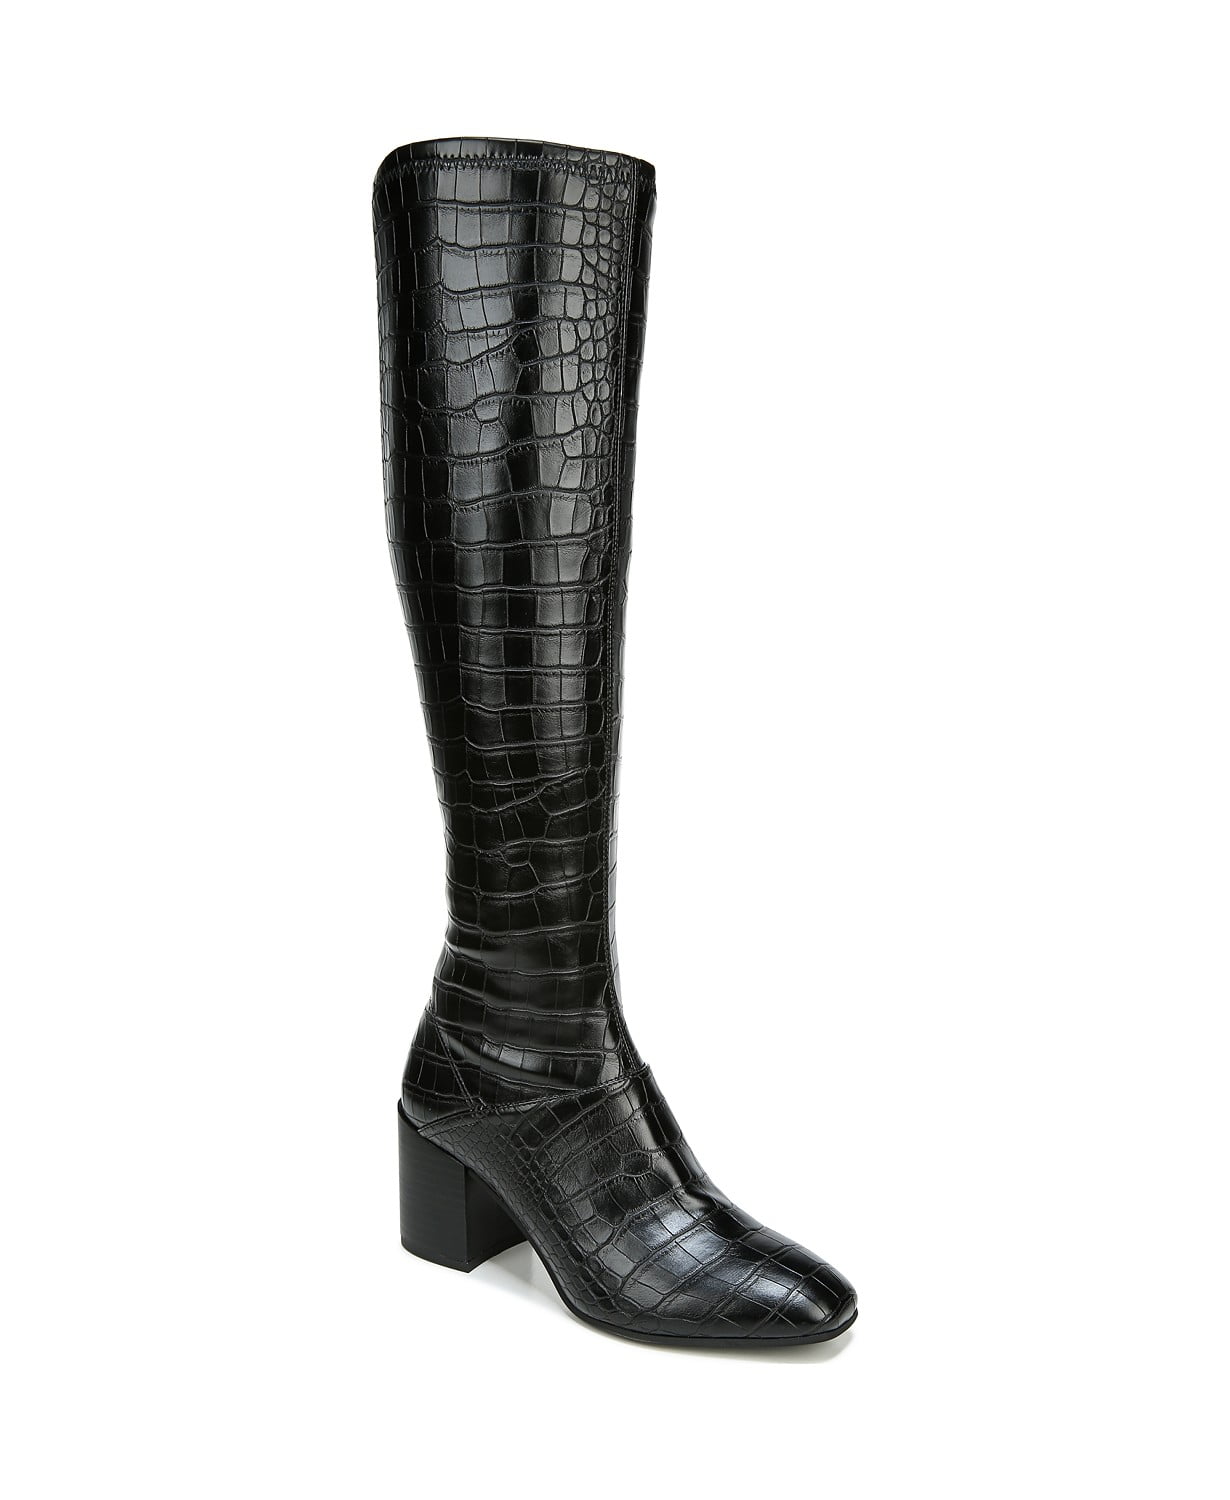 woocommerce-673321-2209615.cloudwaysapps.com-franco-sarto-womens-black-crocodile-embroidered-tribute-high-shaft-boots